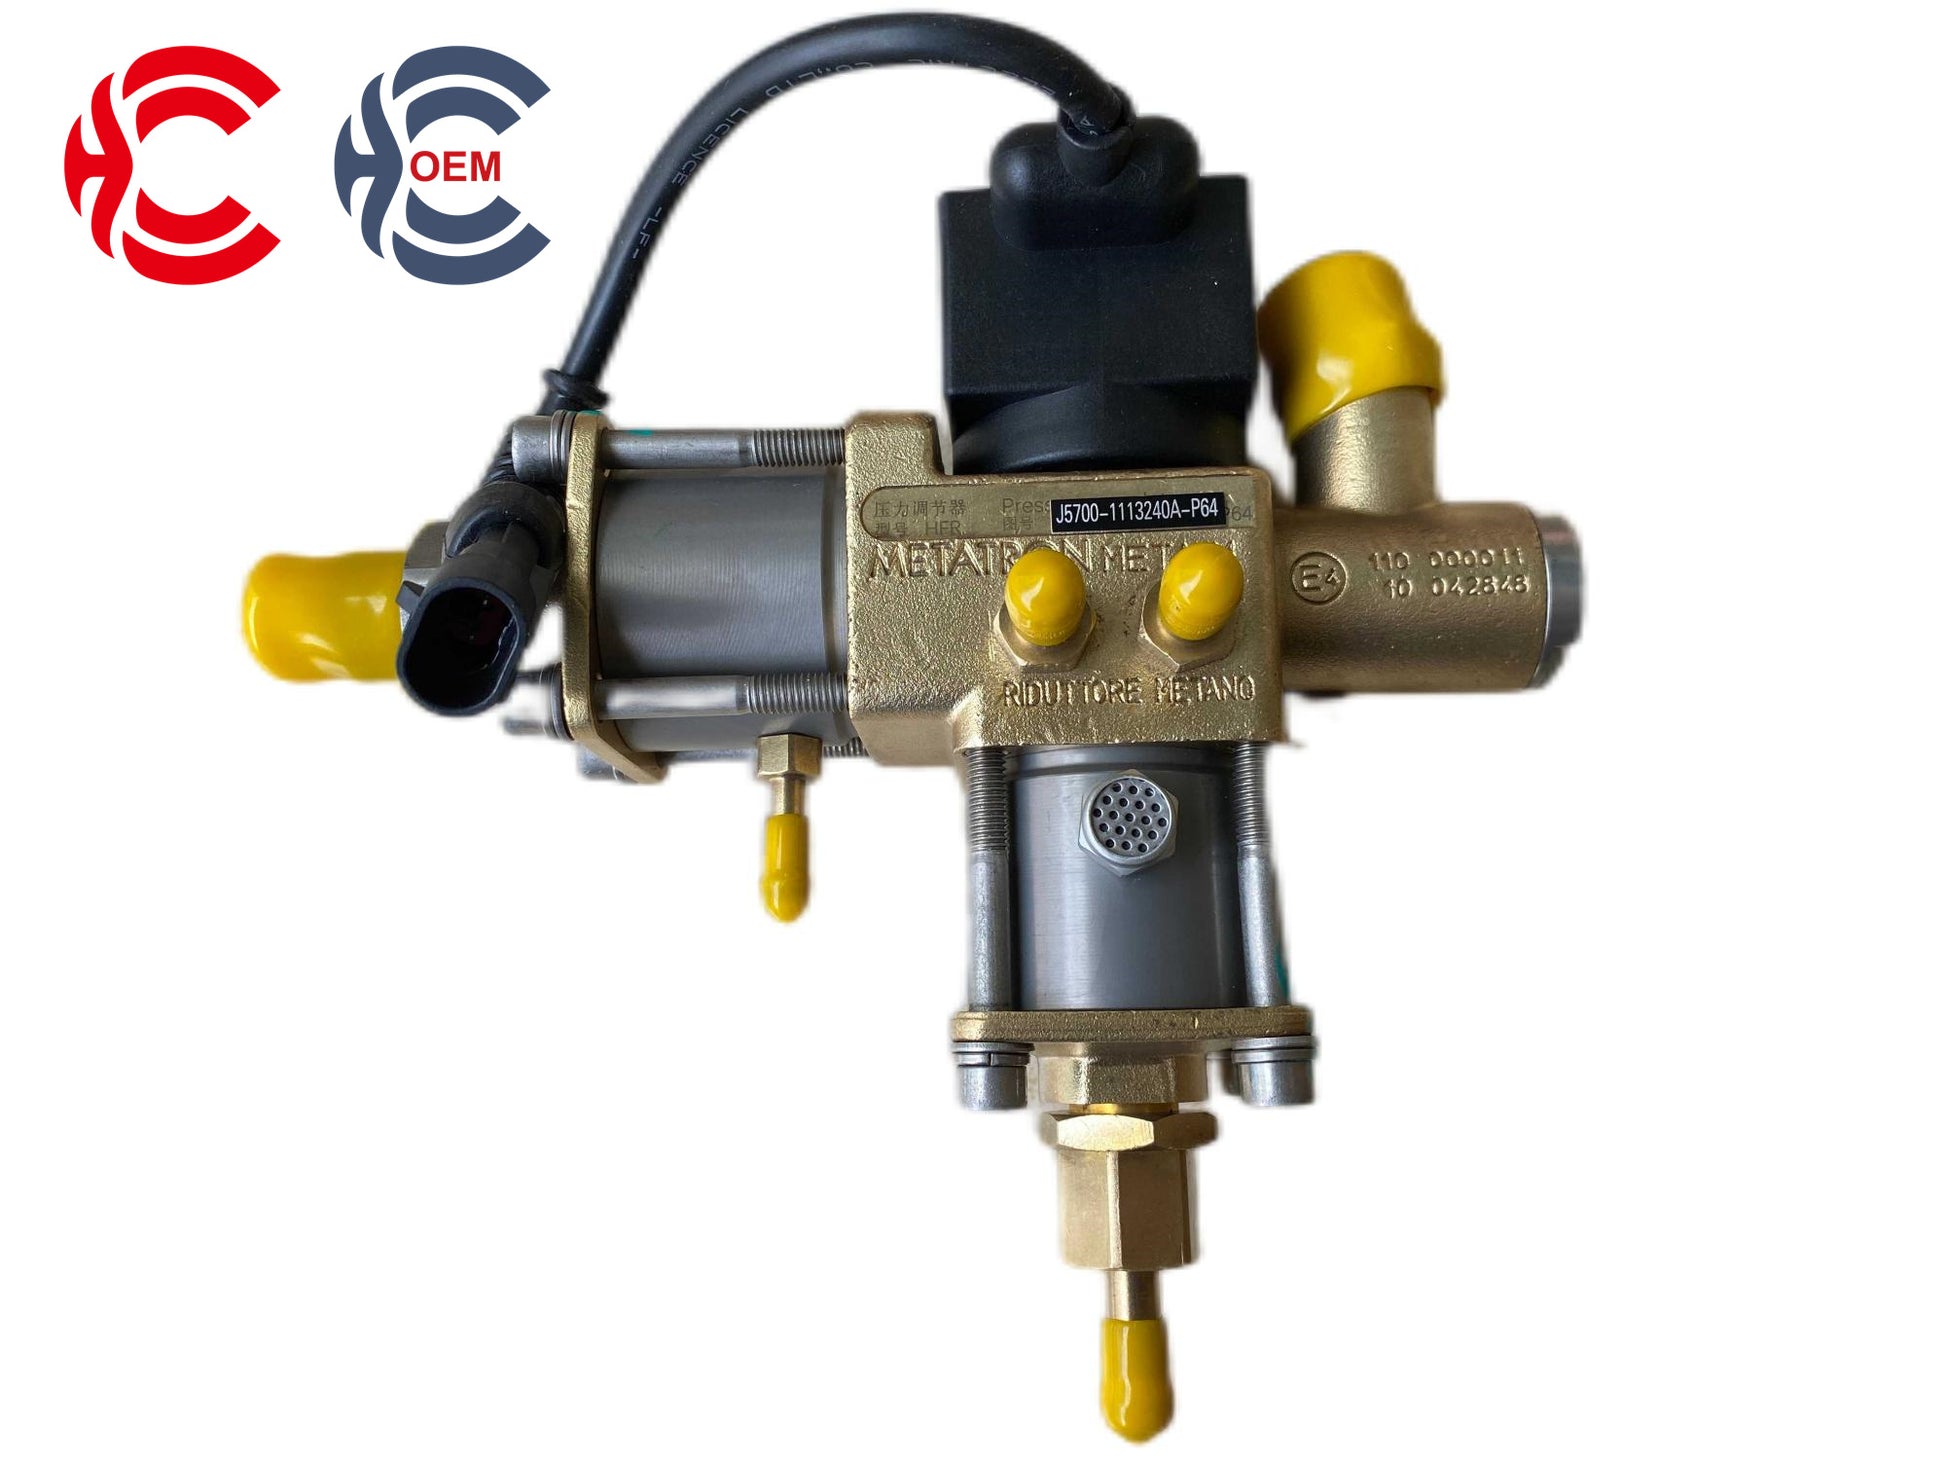 OEM: J5700-1113240A-P64Material: ABS MetalColor: black silver goldenOrigin: Made in ChinaWeight: 1500gPacking List: 1* High Pressure Regulator More ServiceWe can provide OEM Manufacturing serviceWe can Be your one-step solution for Auto PartsWe can provide technical scheme for you Feel Free to Contact Us, We will get back to you as soon as possible.